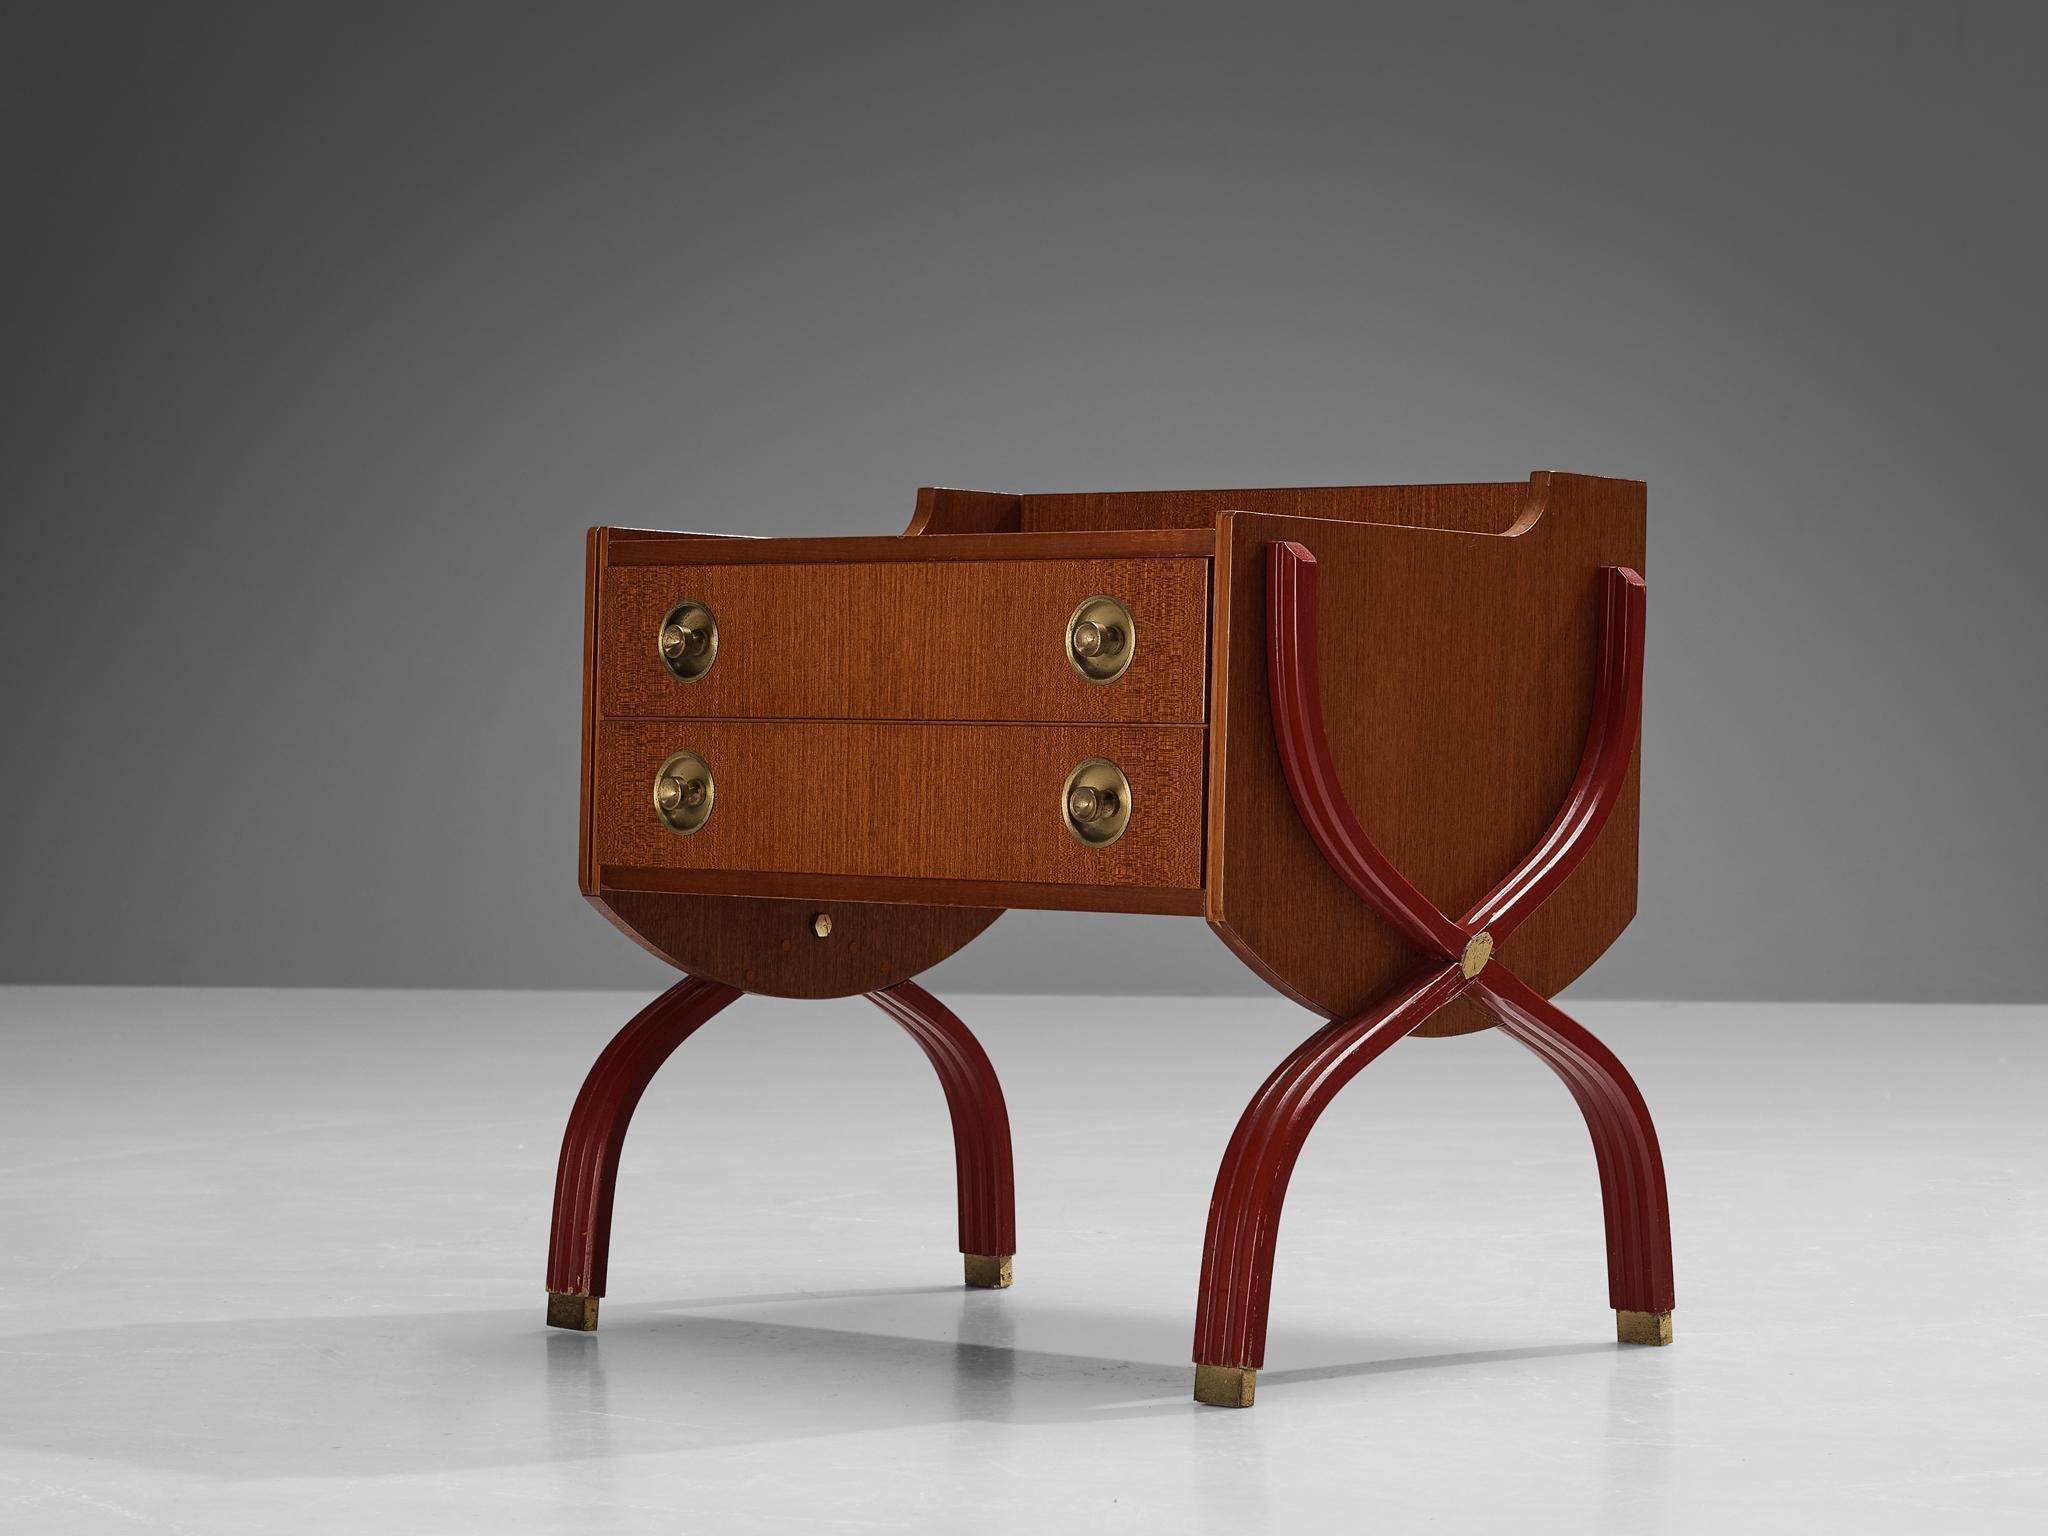 Tosi Arredamenti Pair of Cabinets or Night Stands in Mahogany and Brass